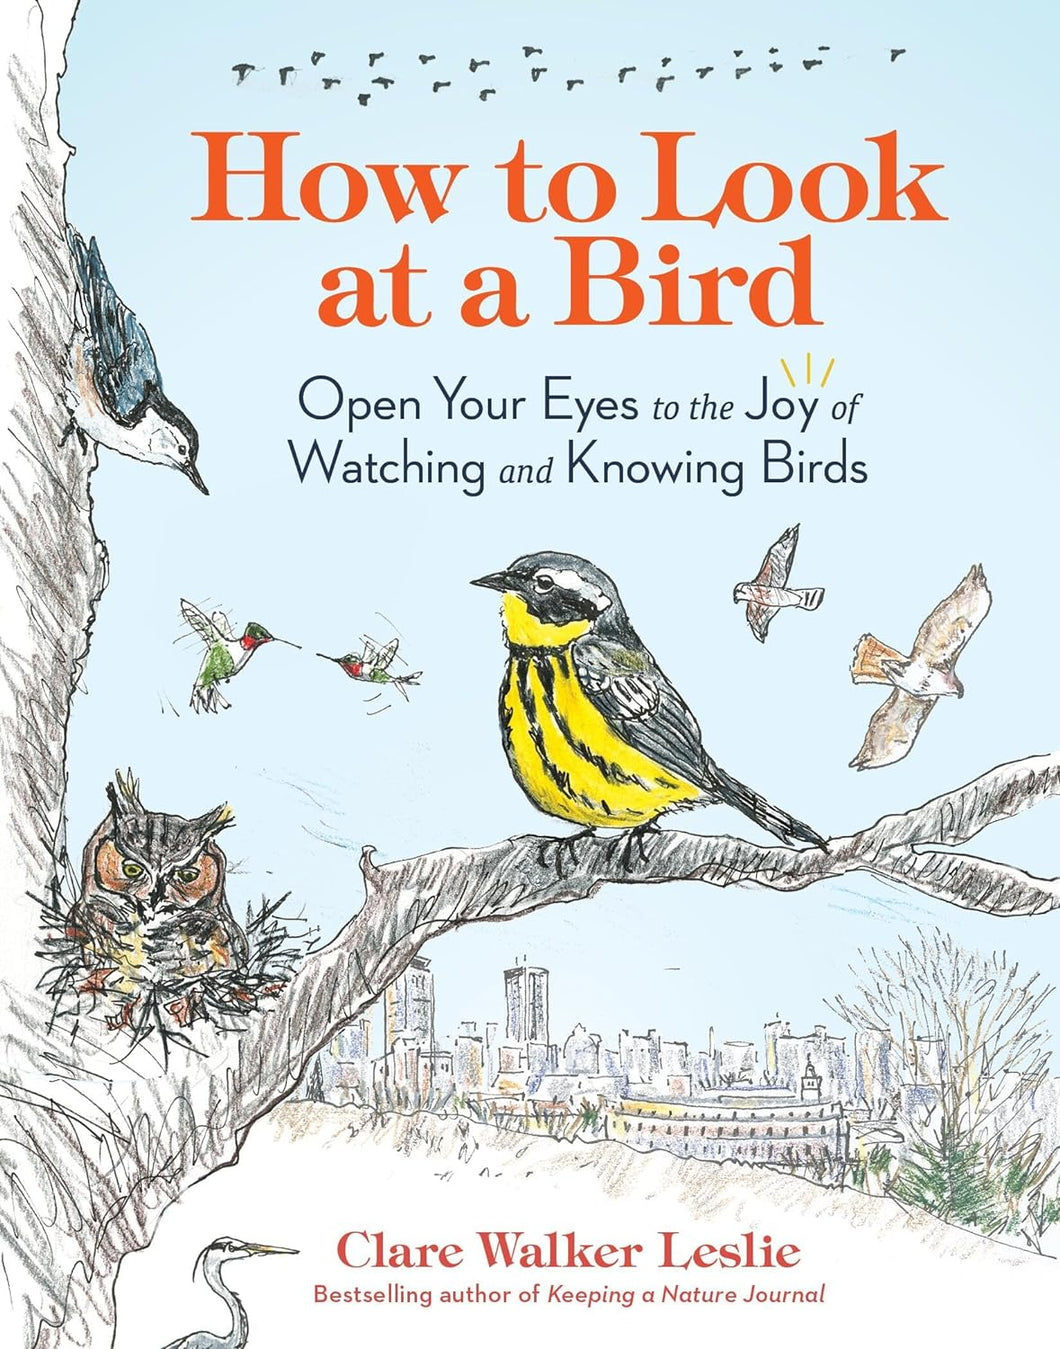 How To Look At A Bird: Open Your Eyes To The Joy Of Watching And Knowing Birds [Clare Walker Leslie]